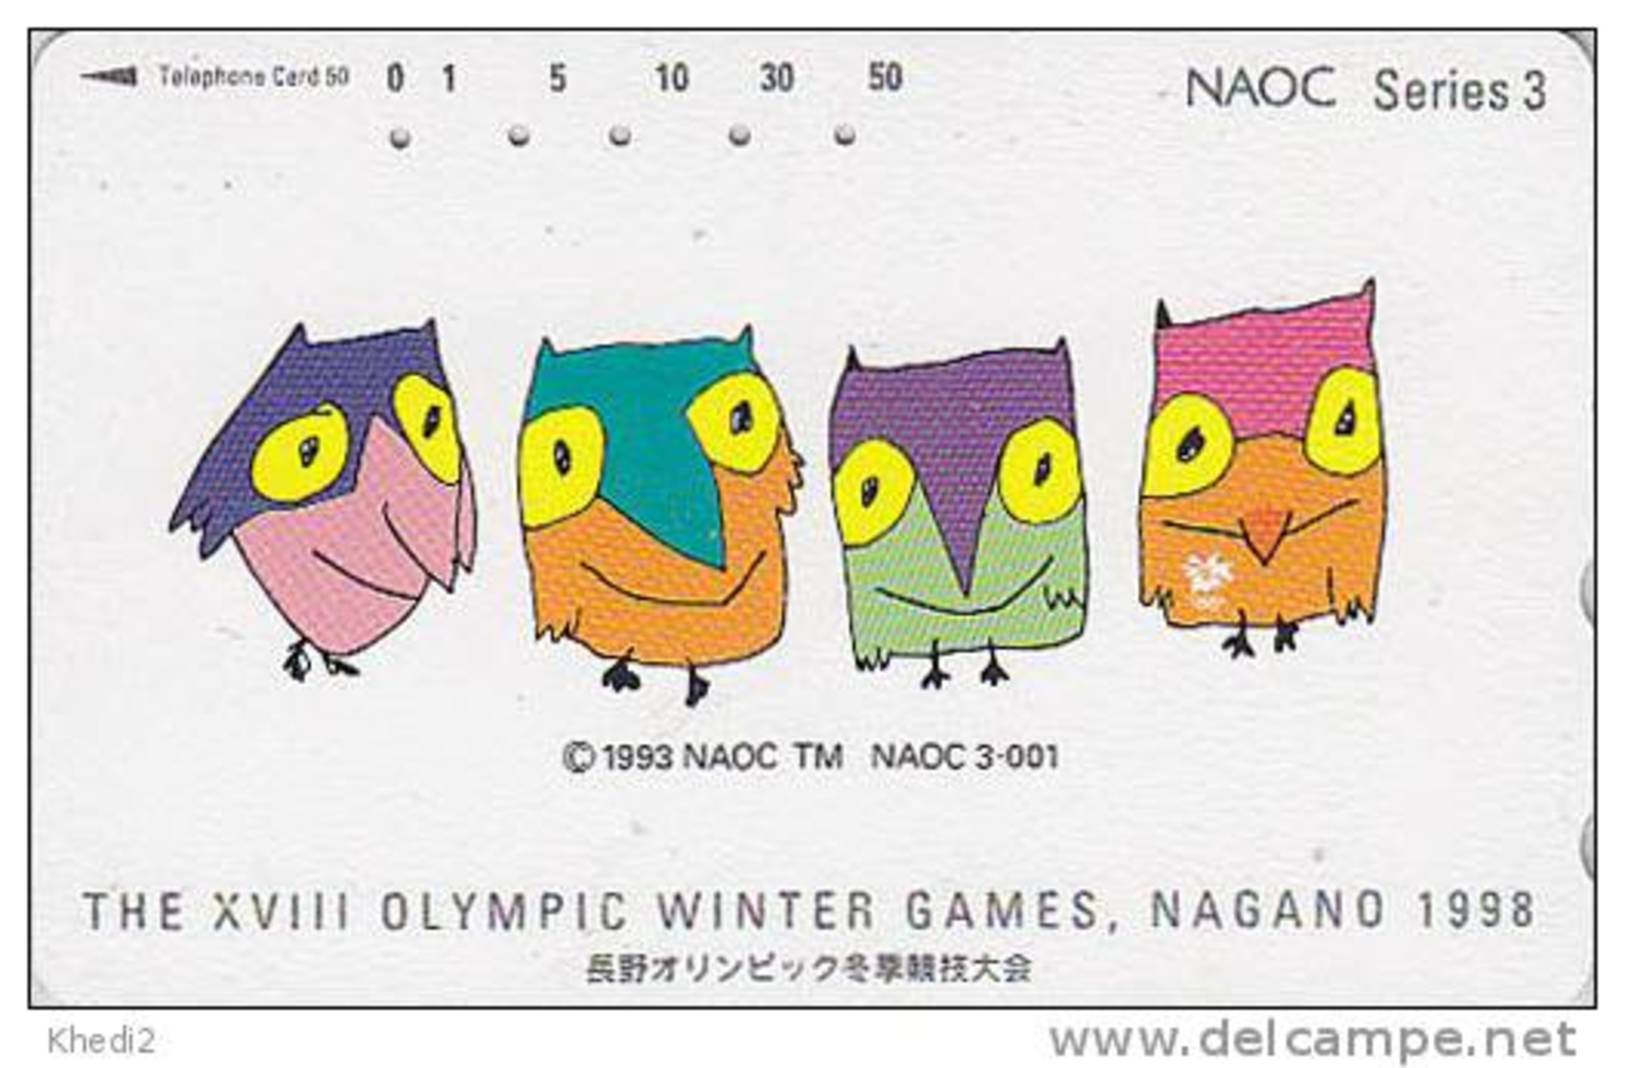 TC JAPON / 270-01680 - HIBOU Jeux Olympiques NAGANO - OWL Bird OLYMPIC GAMES JAPAN Free Phonecard - EULE - 3920 - Olympische Spiele